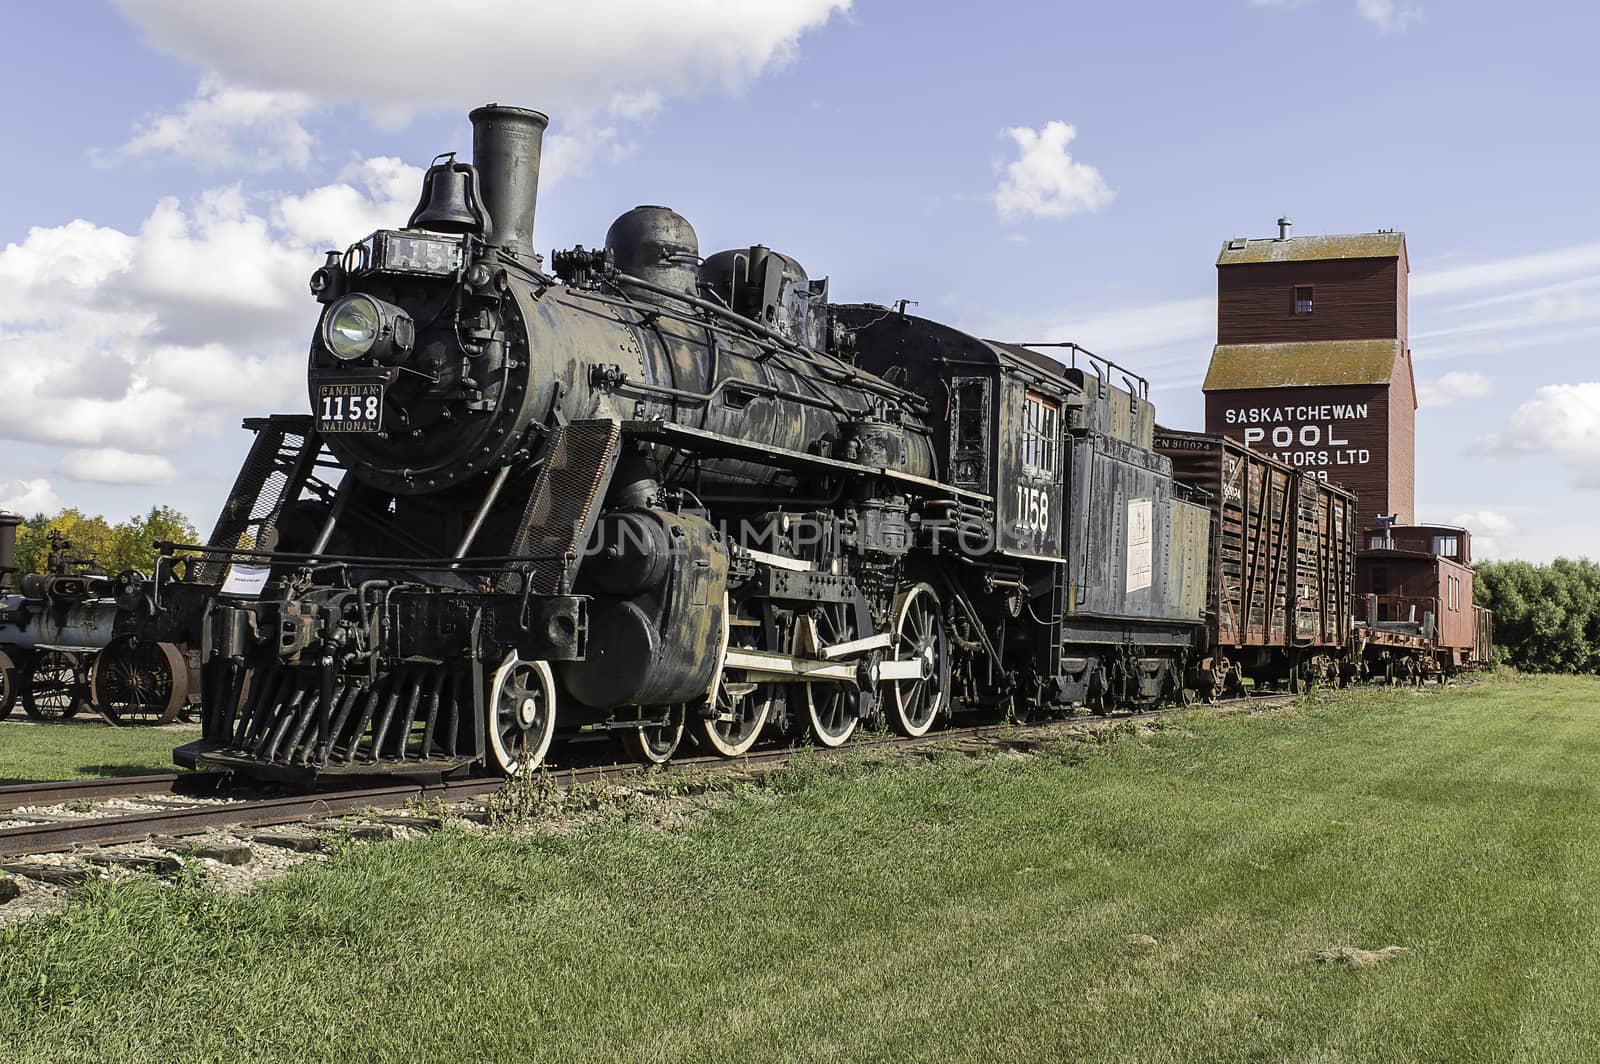 This vintage steam locomotive, known as the 10 wheeler or a type 4-6-0, was a favorite around the world during the first half of the 20th Century.